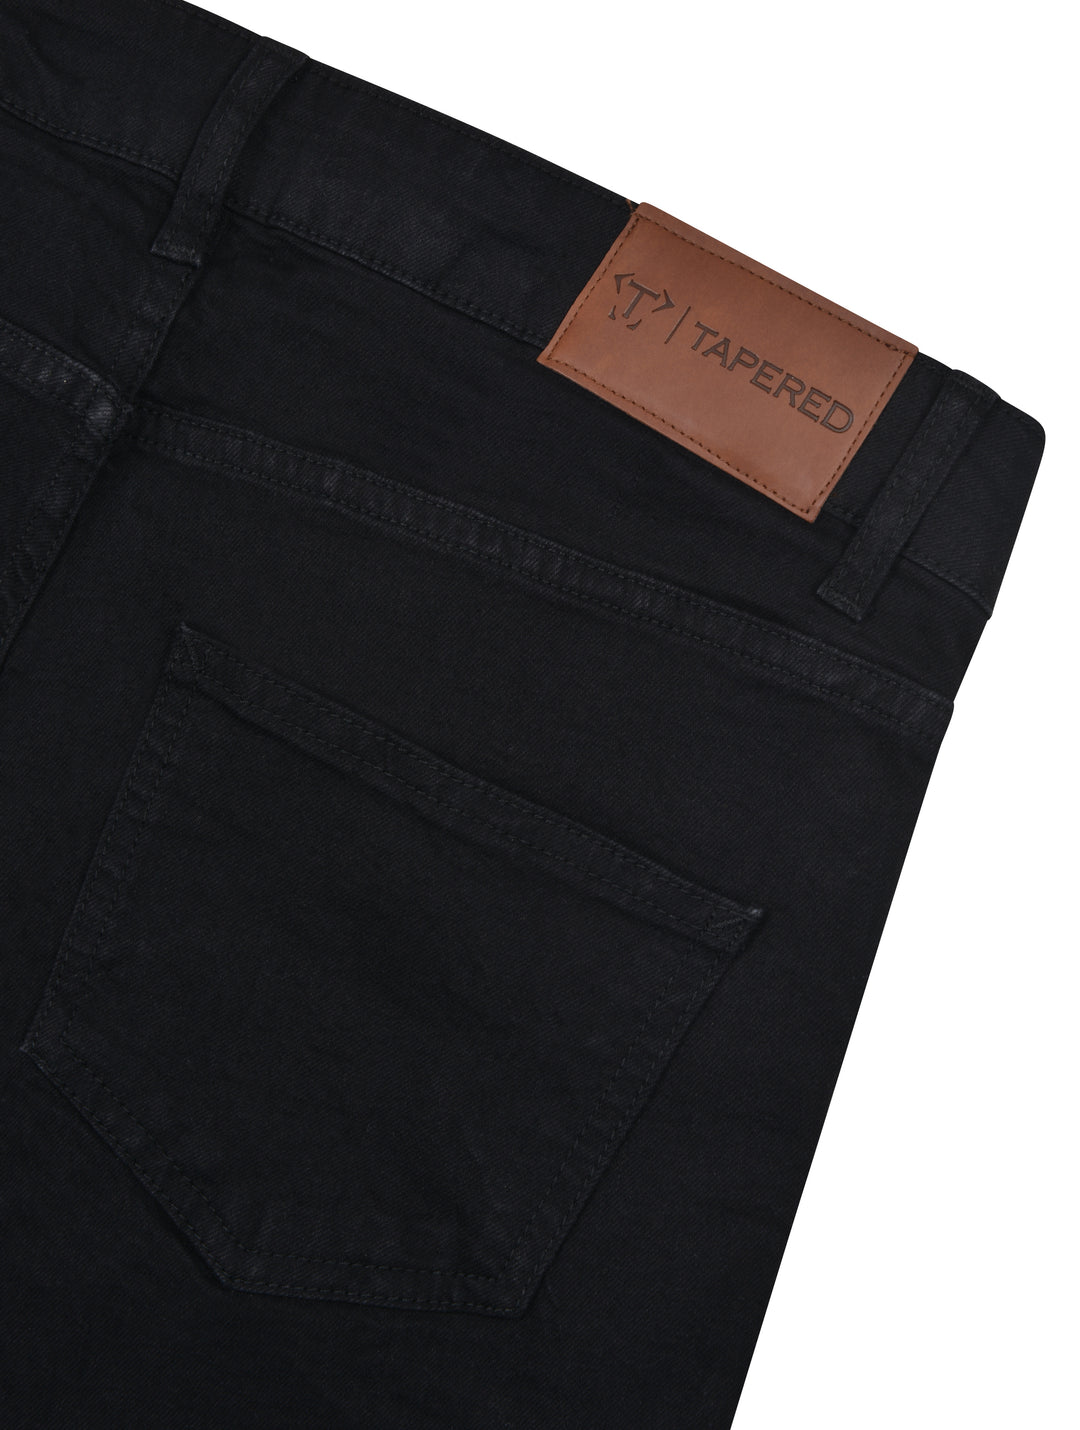 Black Tapered Jeans with Brown Leather Patch